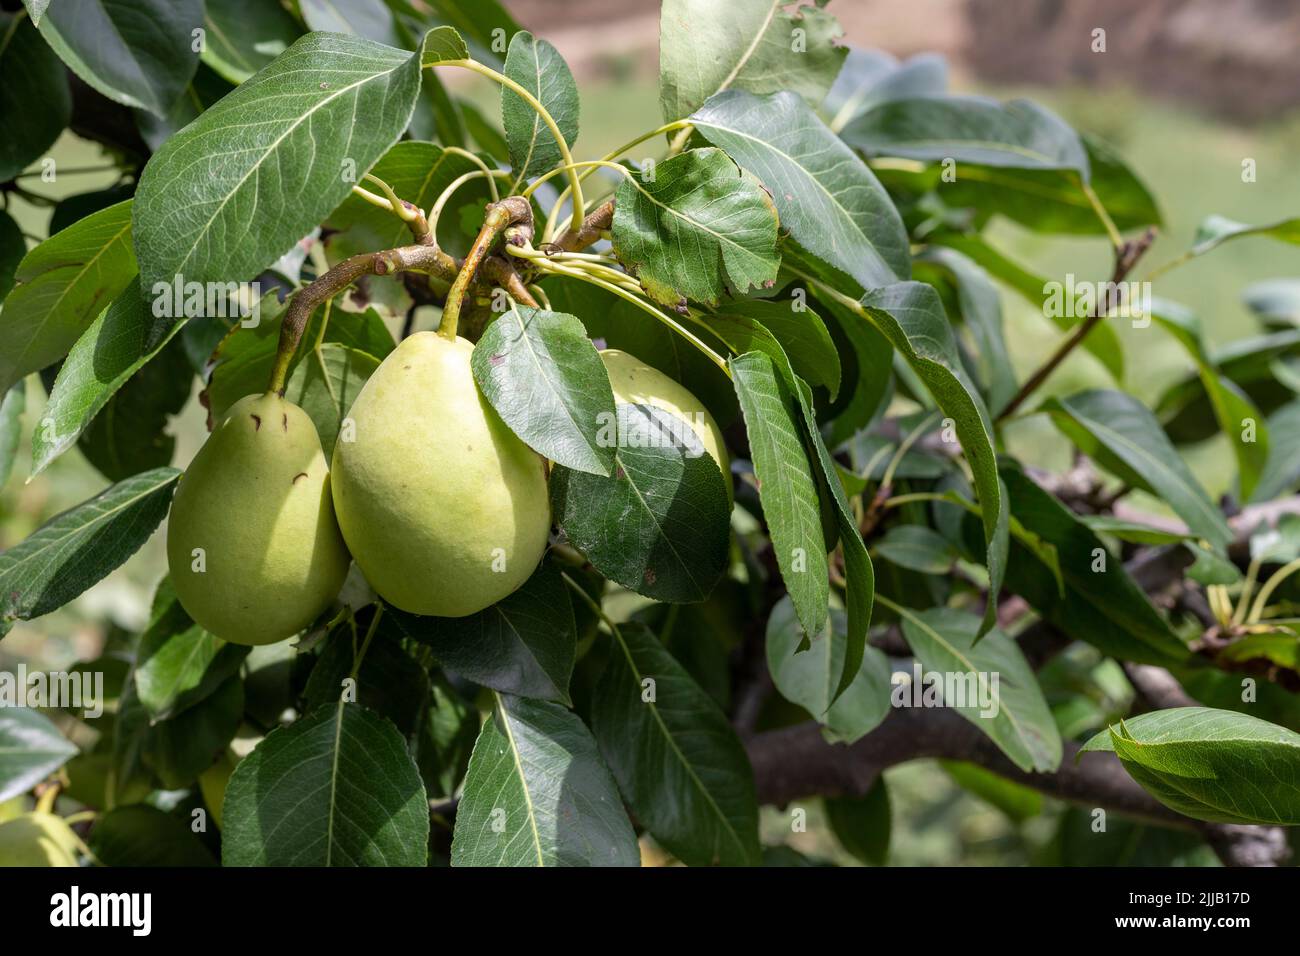 Pear fruit at a tree close-up Stock Photo